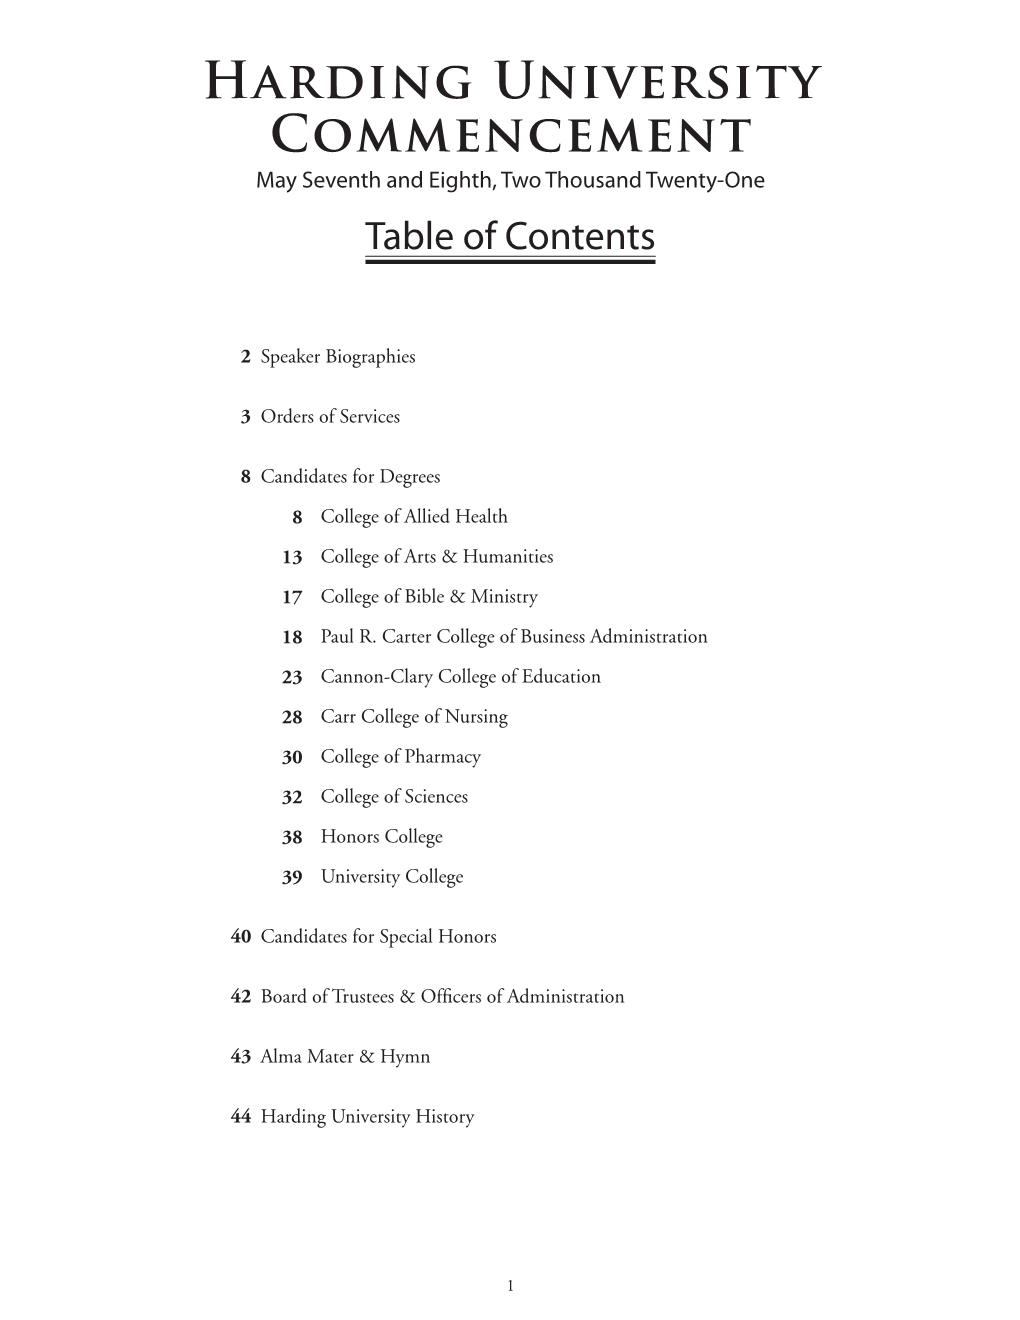 Harding University Commencement May Seventh and Eighth, Two Thousand Twenty-One Table of Contents